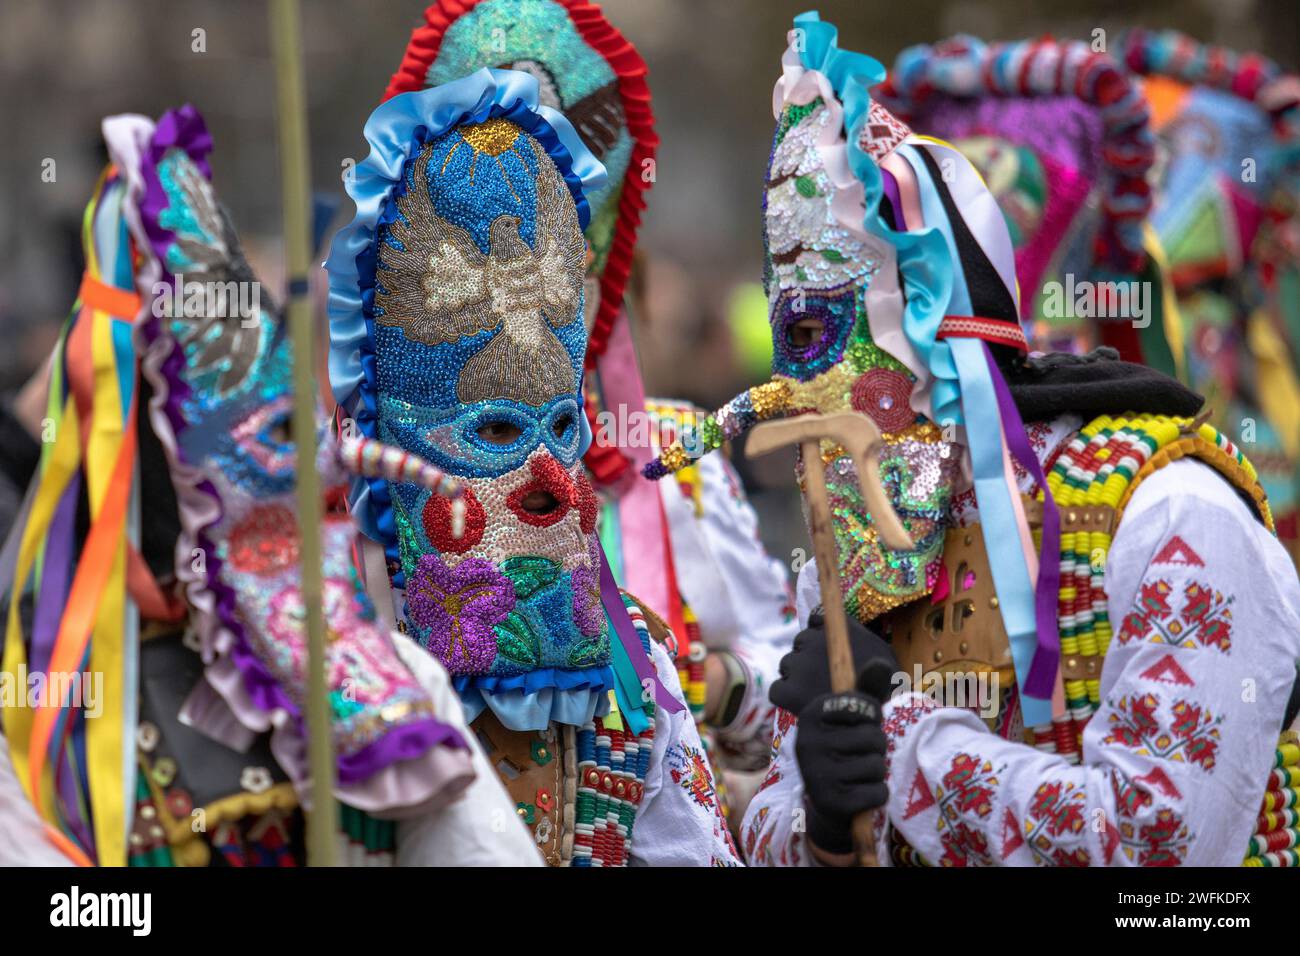 Pernik, Bulgaria - January 27, 2024: 30th anniversary Masquerade festival in Pernik Bulgaria. People with a mask called Kukeri dance and perform to sc Stock Photo